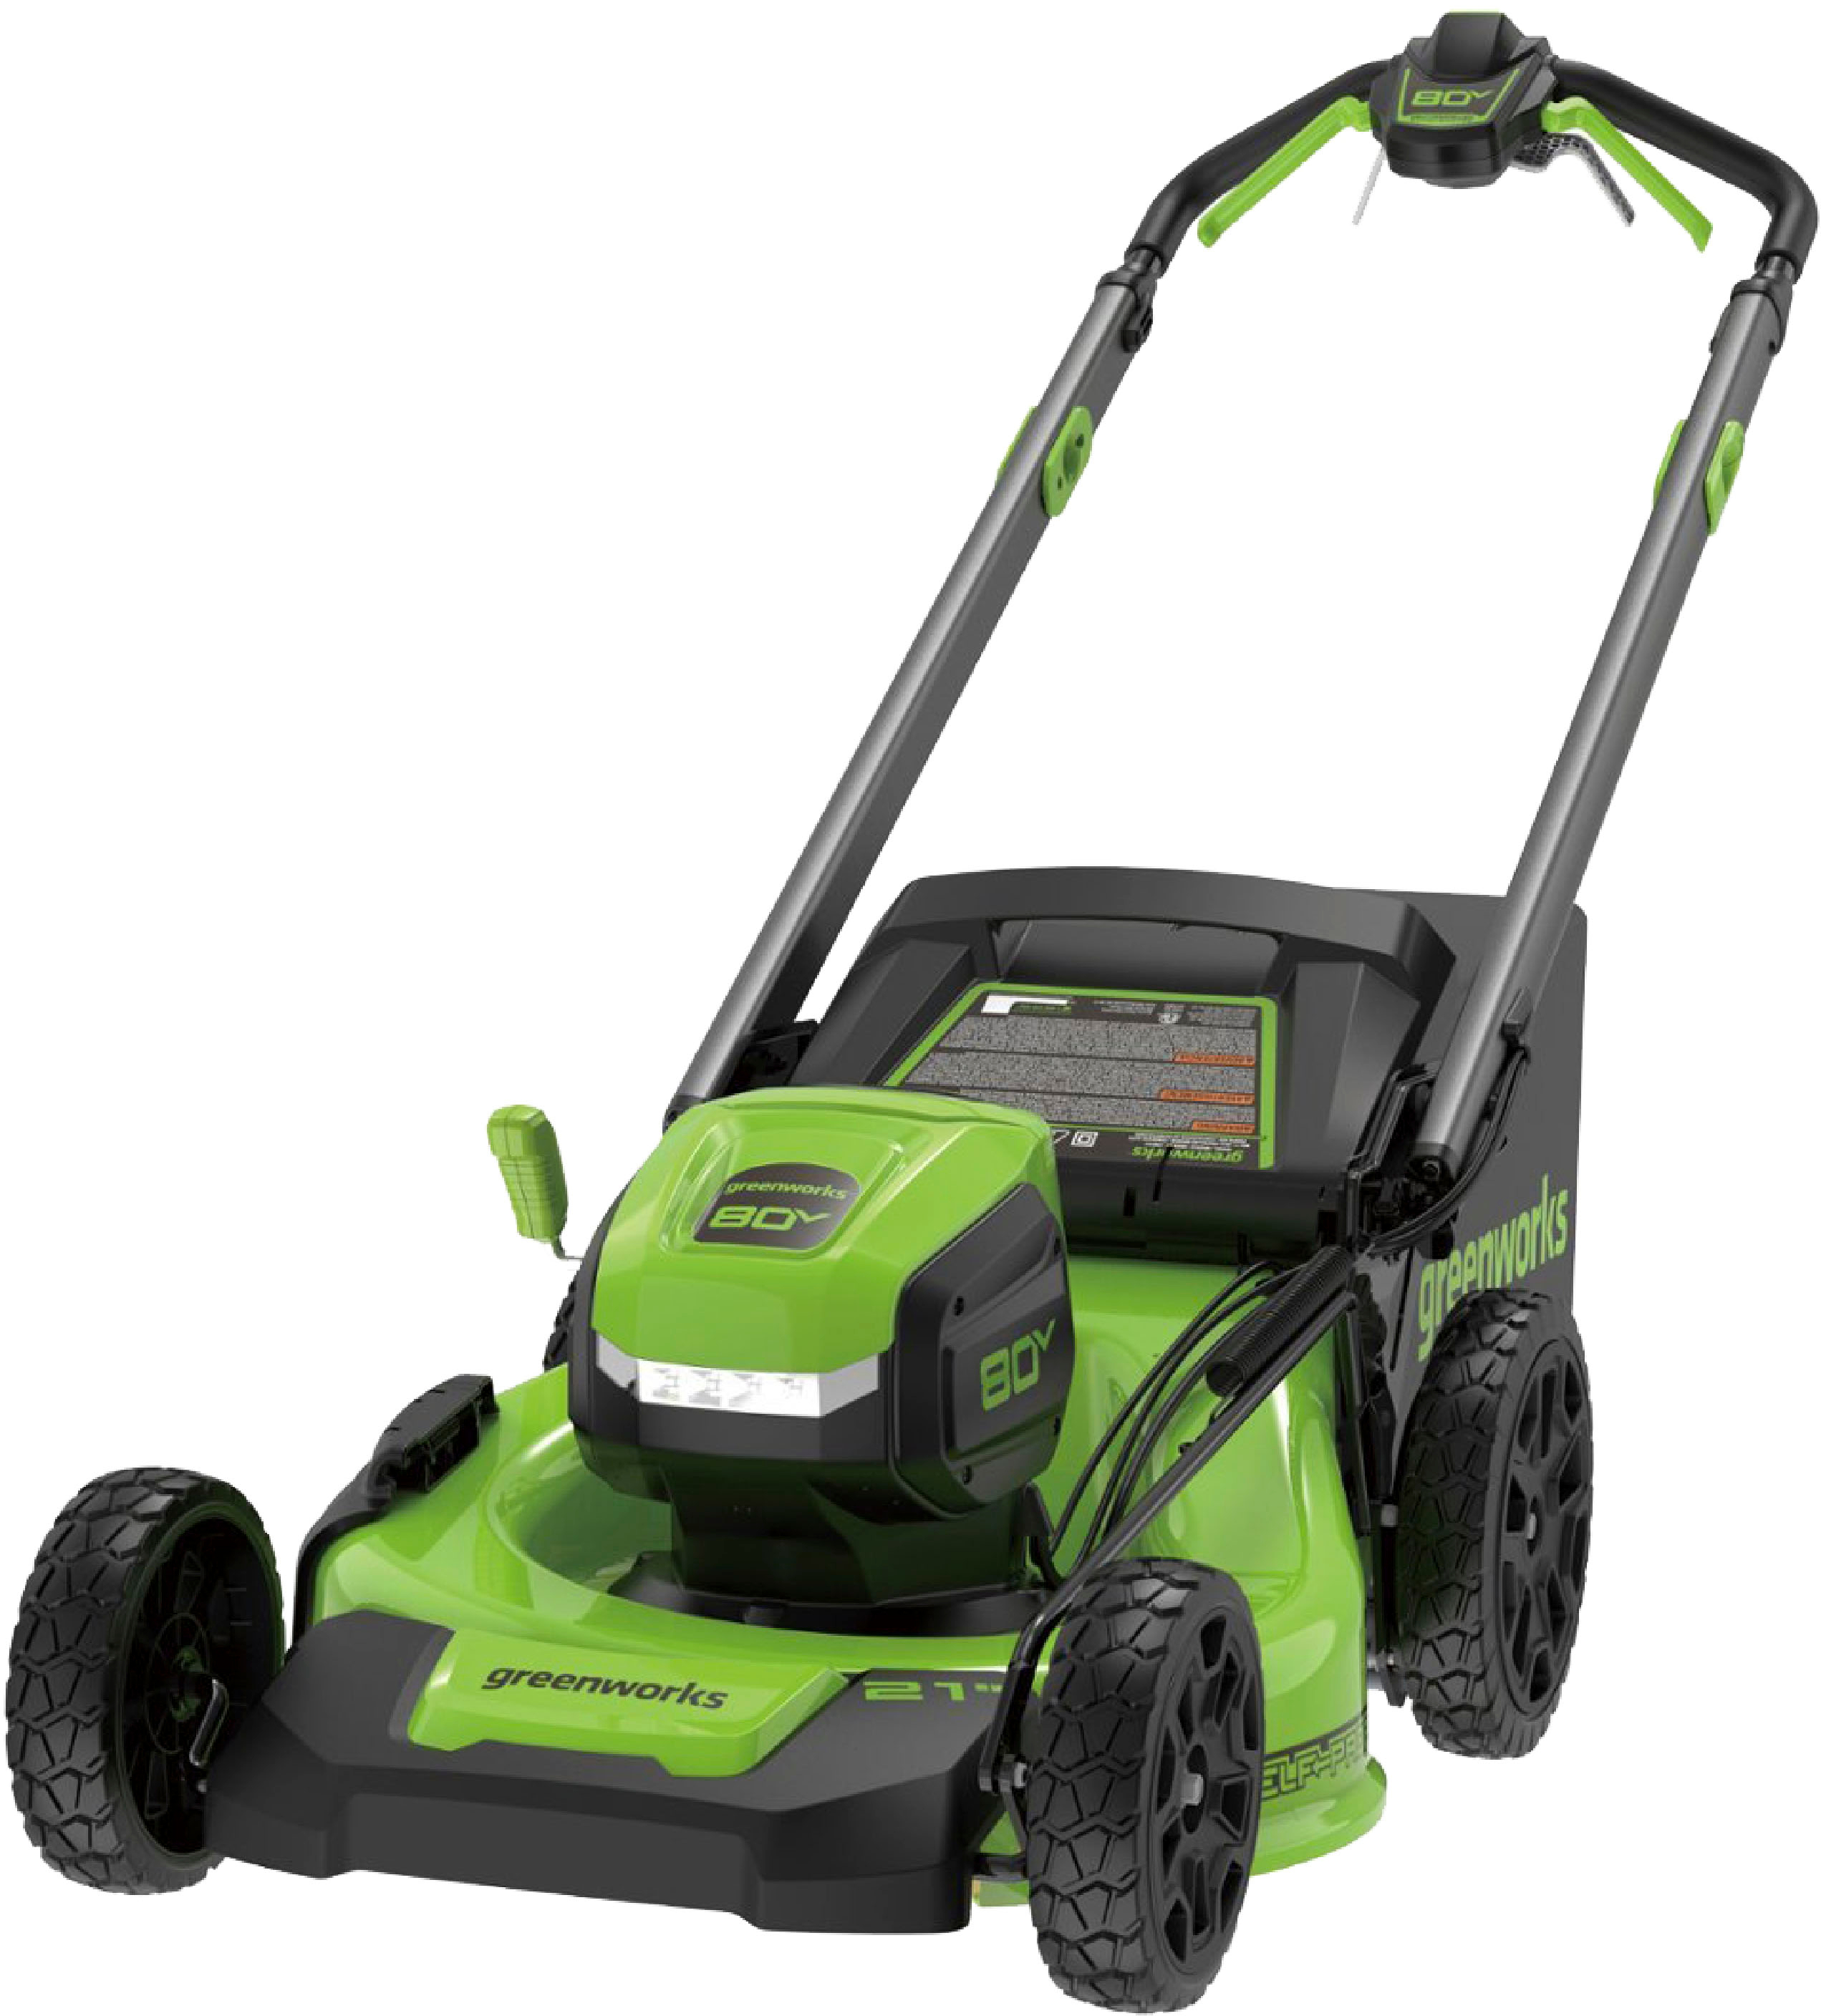 We Tested the Eco-Friendly Greenworks 25022 Lawn Mower